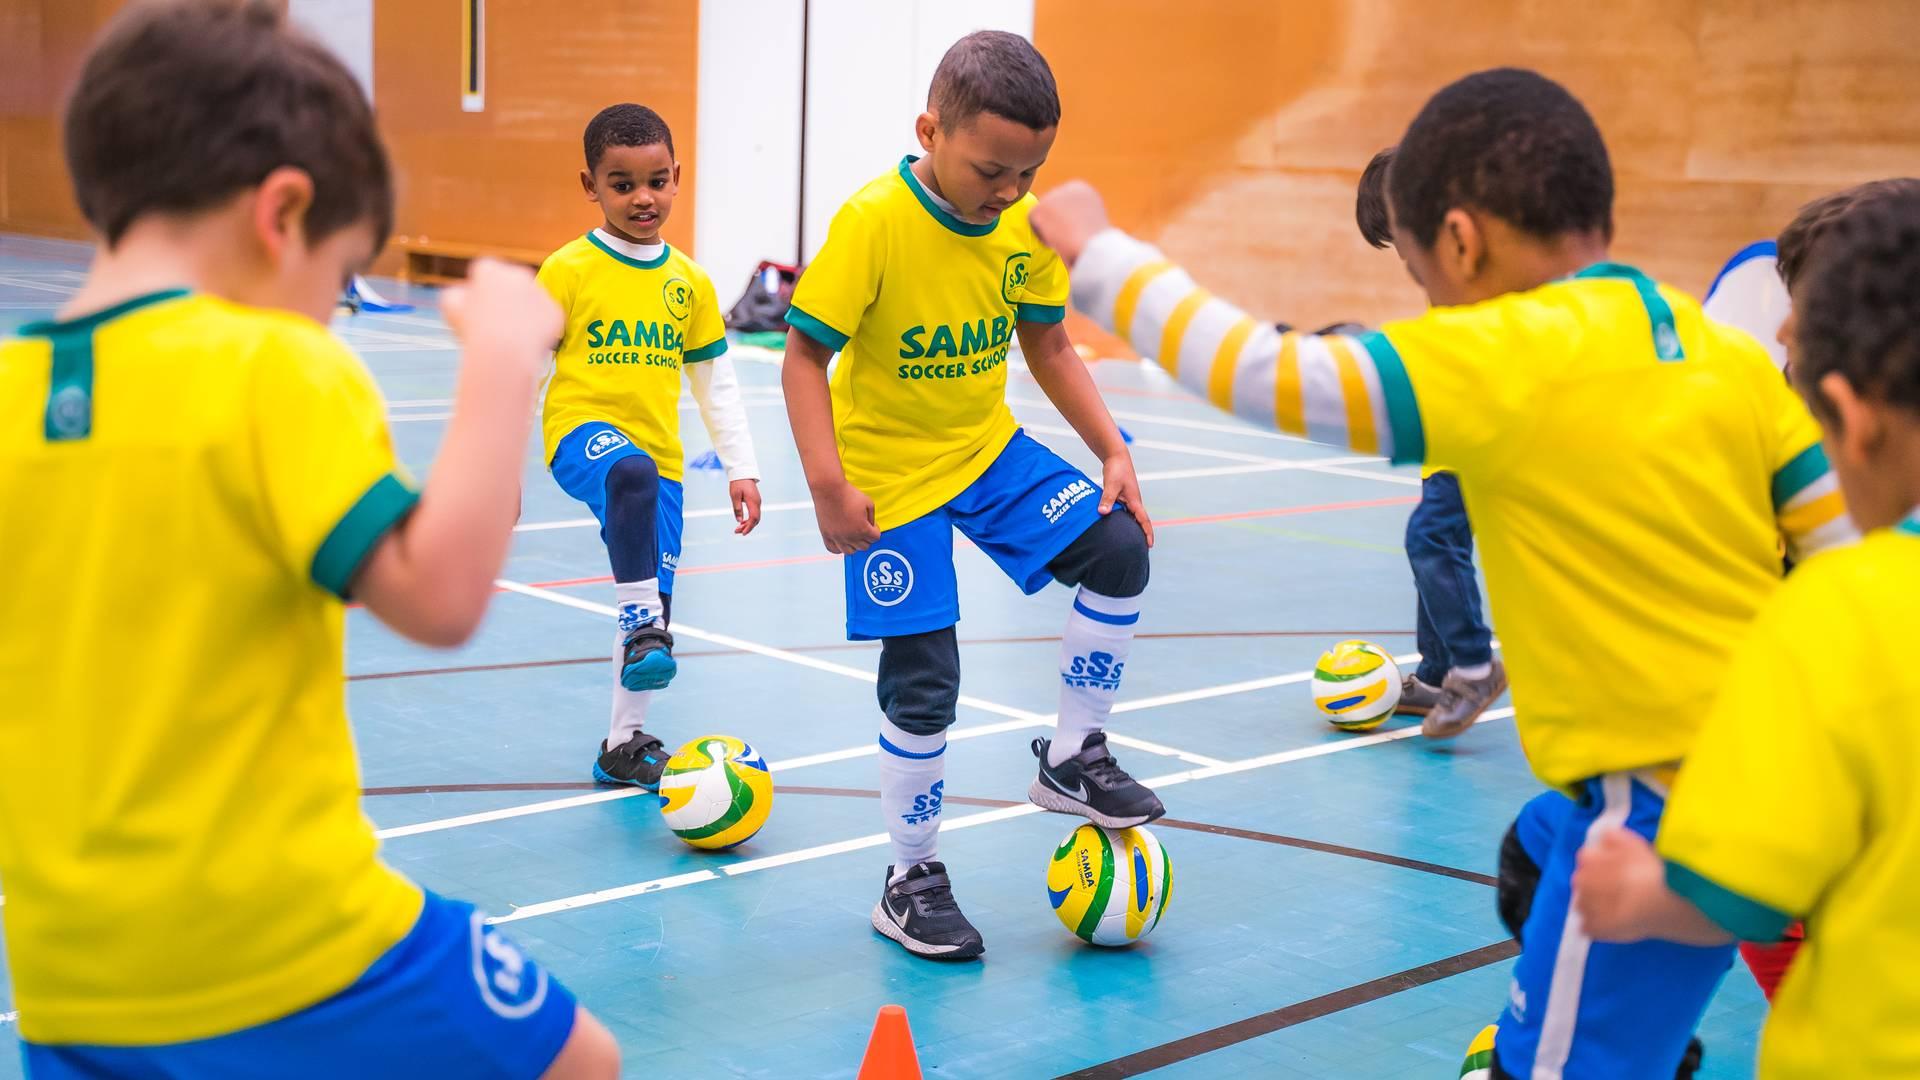 [Southfields] Football Classes for Kids aged 4-12 photo